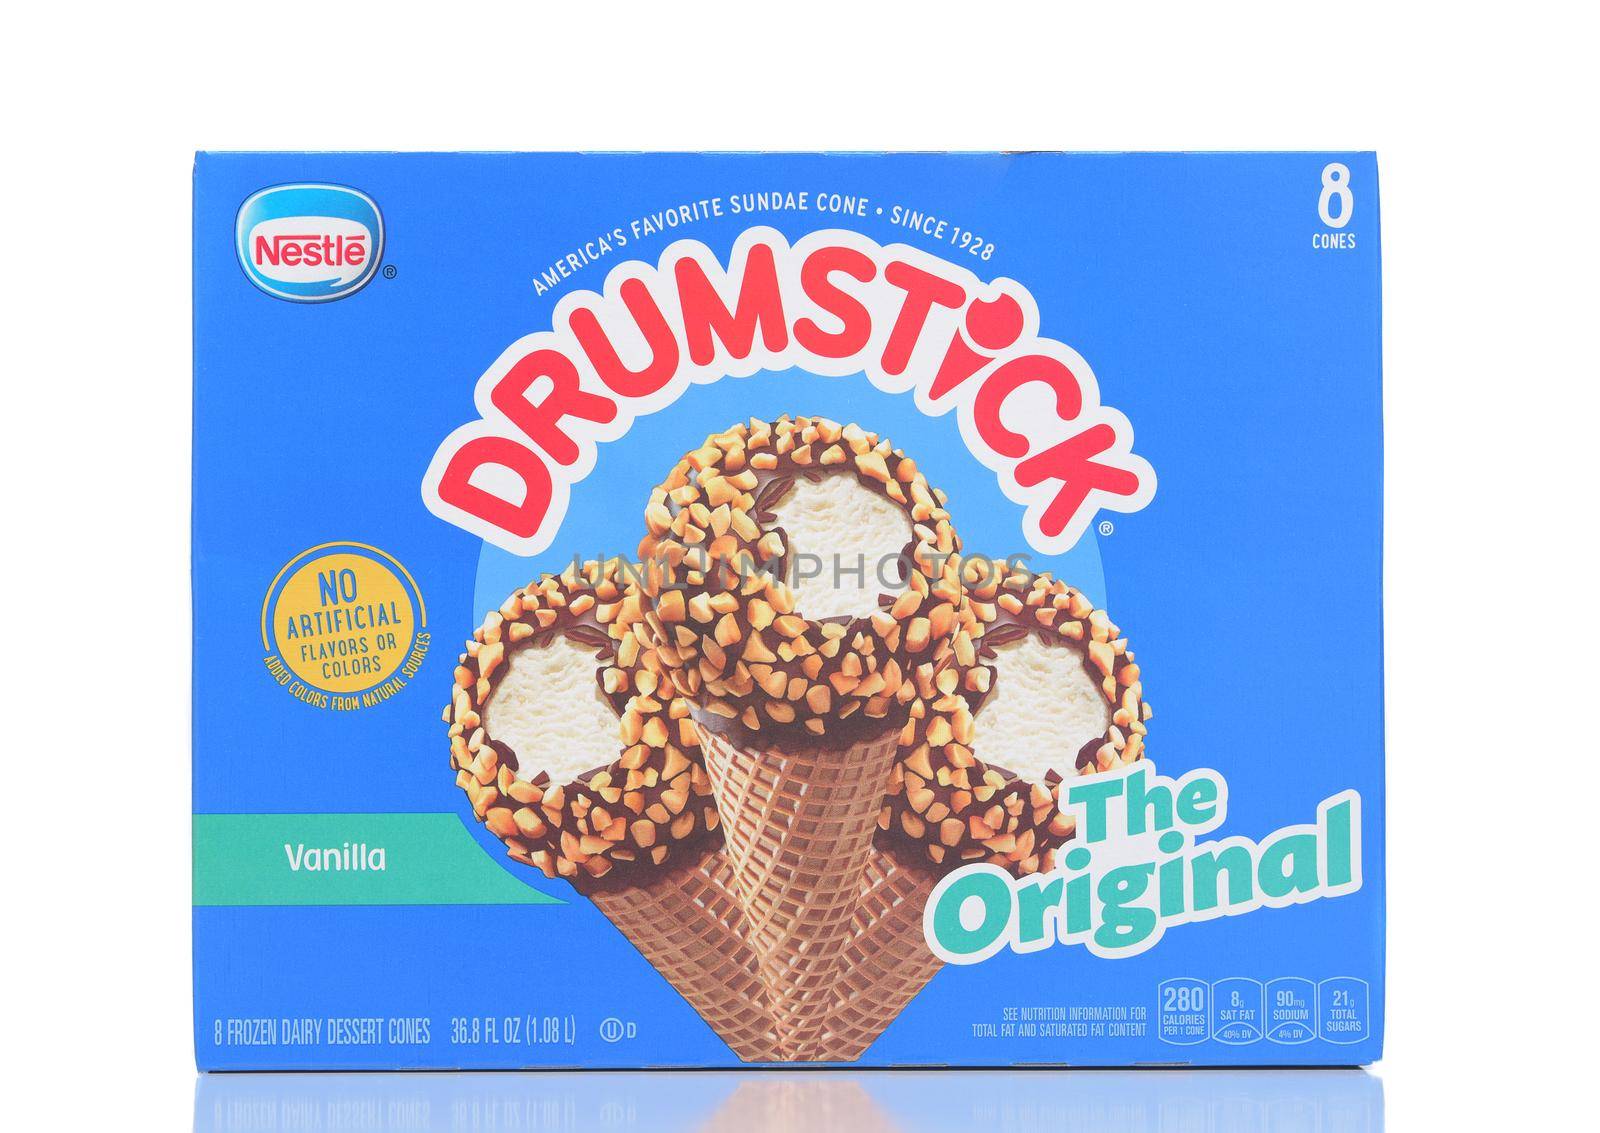 IRVINE, CALIFORNIA - 28 MAY 2021: An 8 pack box of The Original Vanilla Drumstick brand Ice Cream Novelty from Nestle.